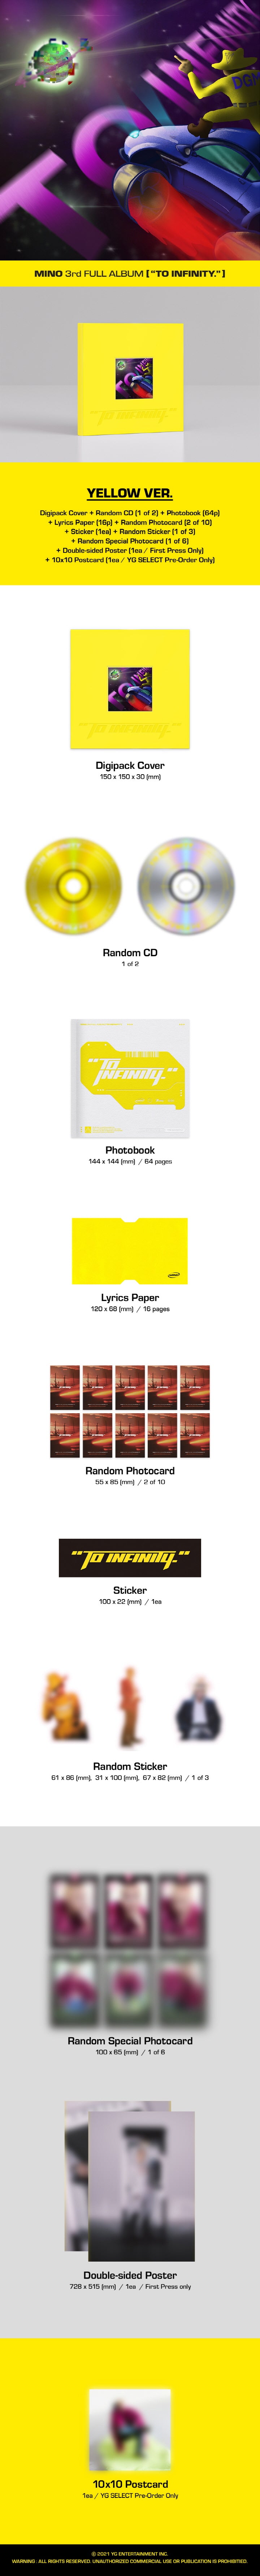 1 CD
1 Photo Book (64 pages)
1 Lyrics Paper (16 pages)
2 Photo Cards (random out of 2 types)
1 Sticker
1 Random Sticker (r...